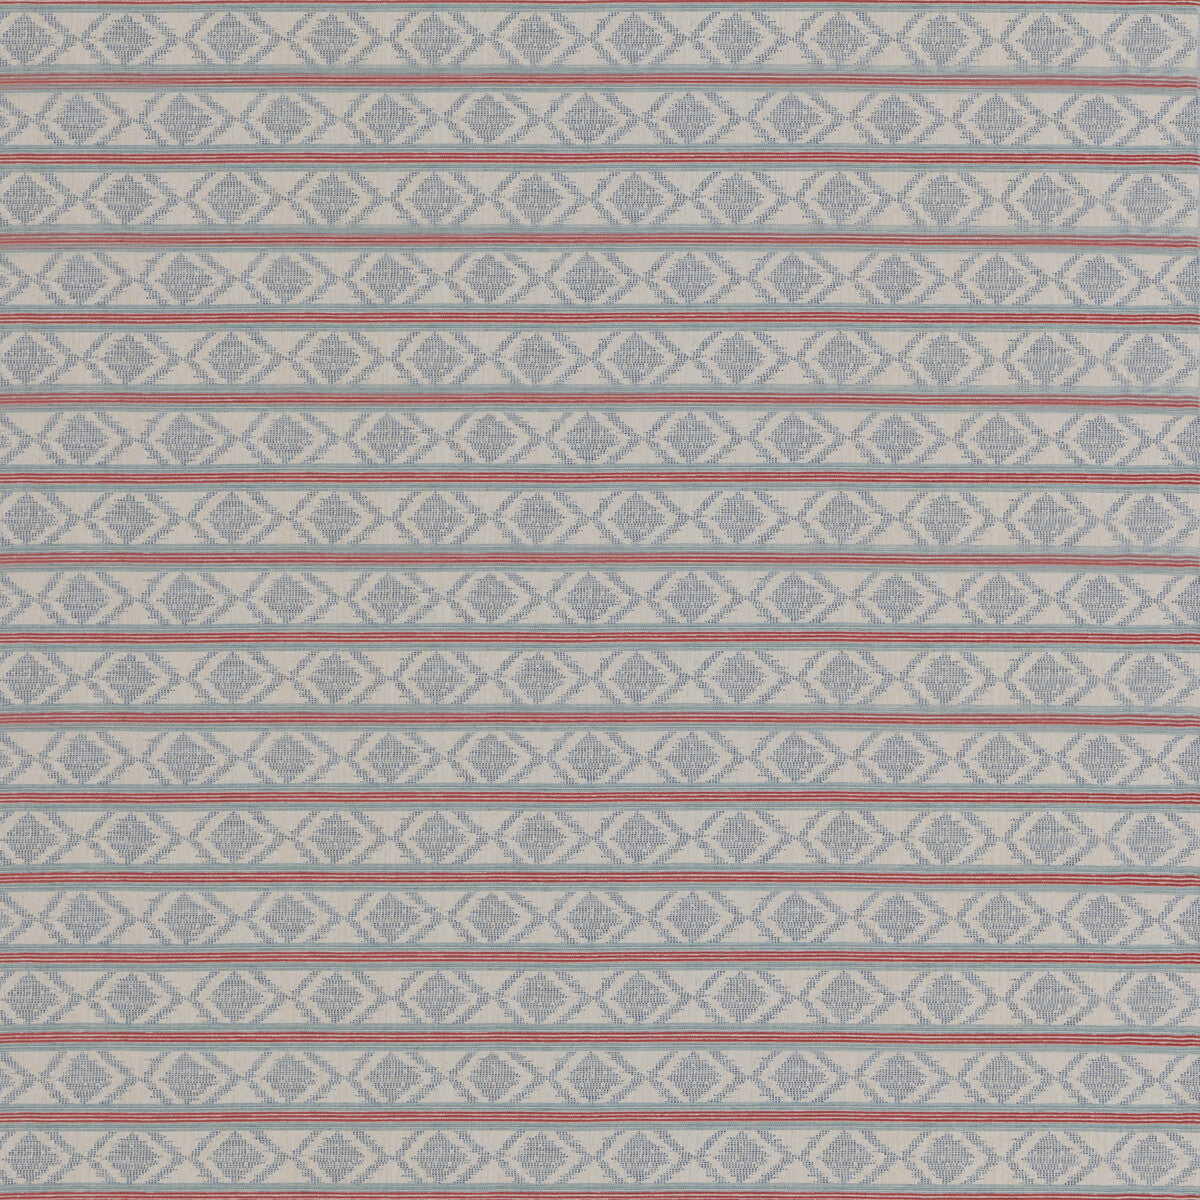 Burford Stripe fabric in red/blue color - pattern BF11034.1.0 - by G P &amp; J Baker in the Burford Weaves collection